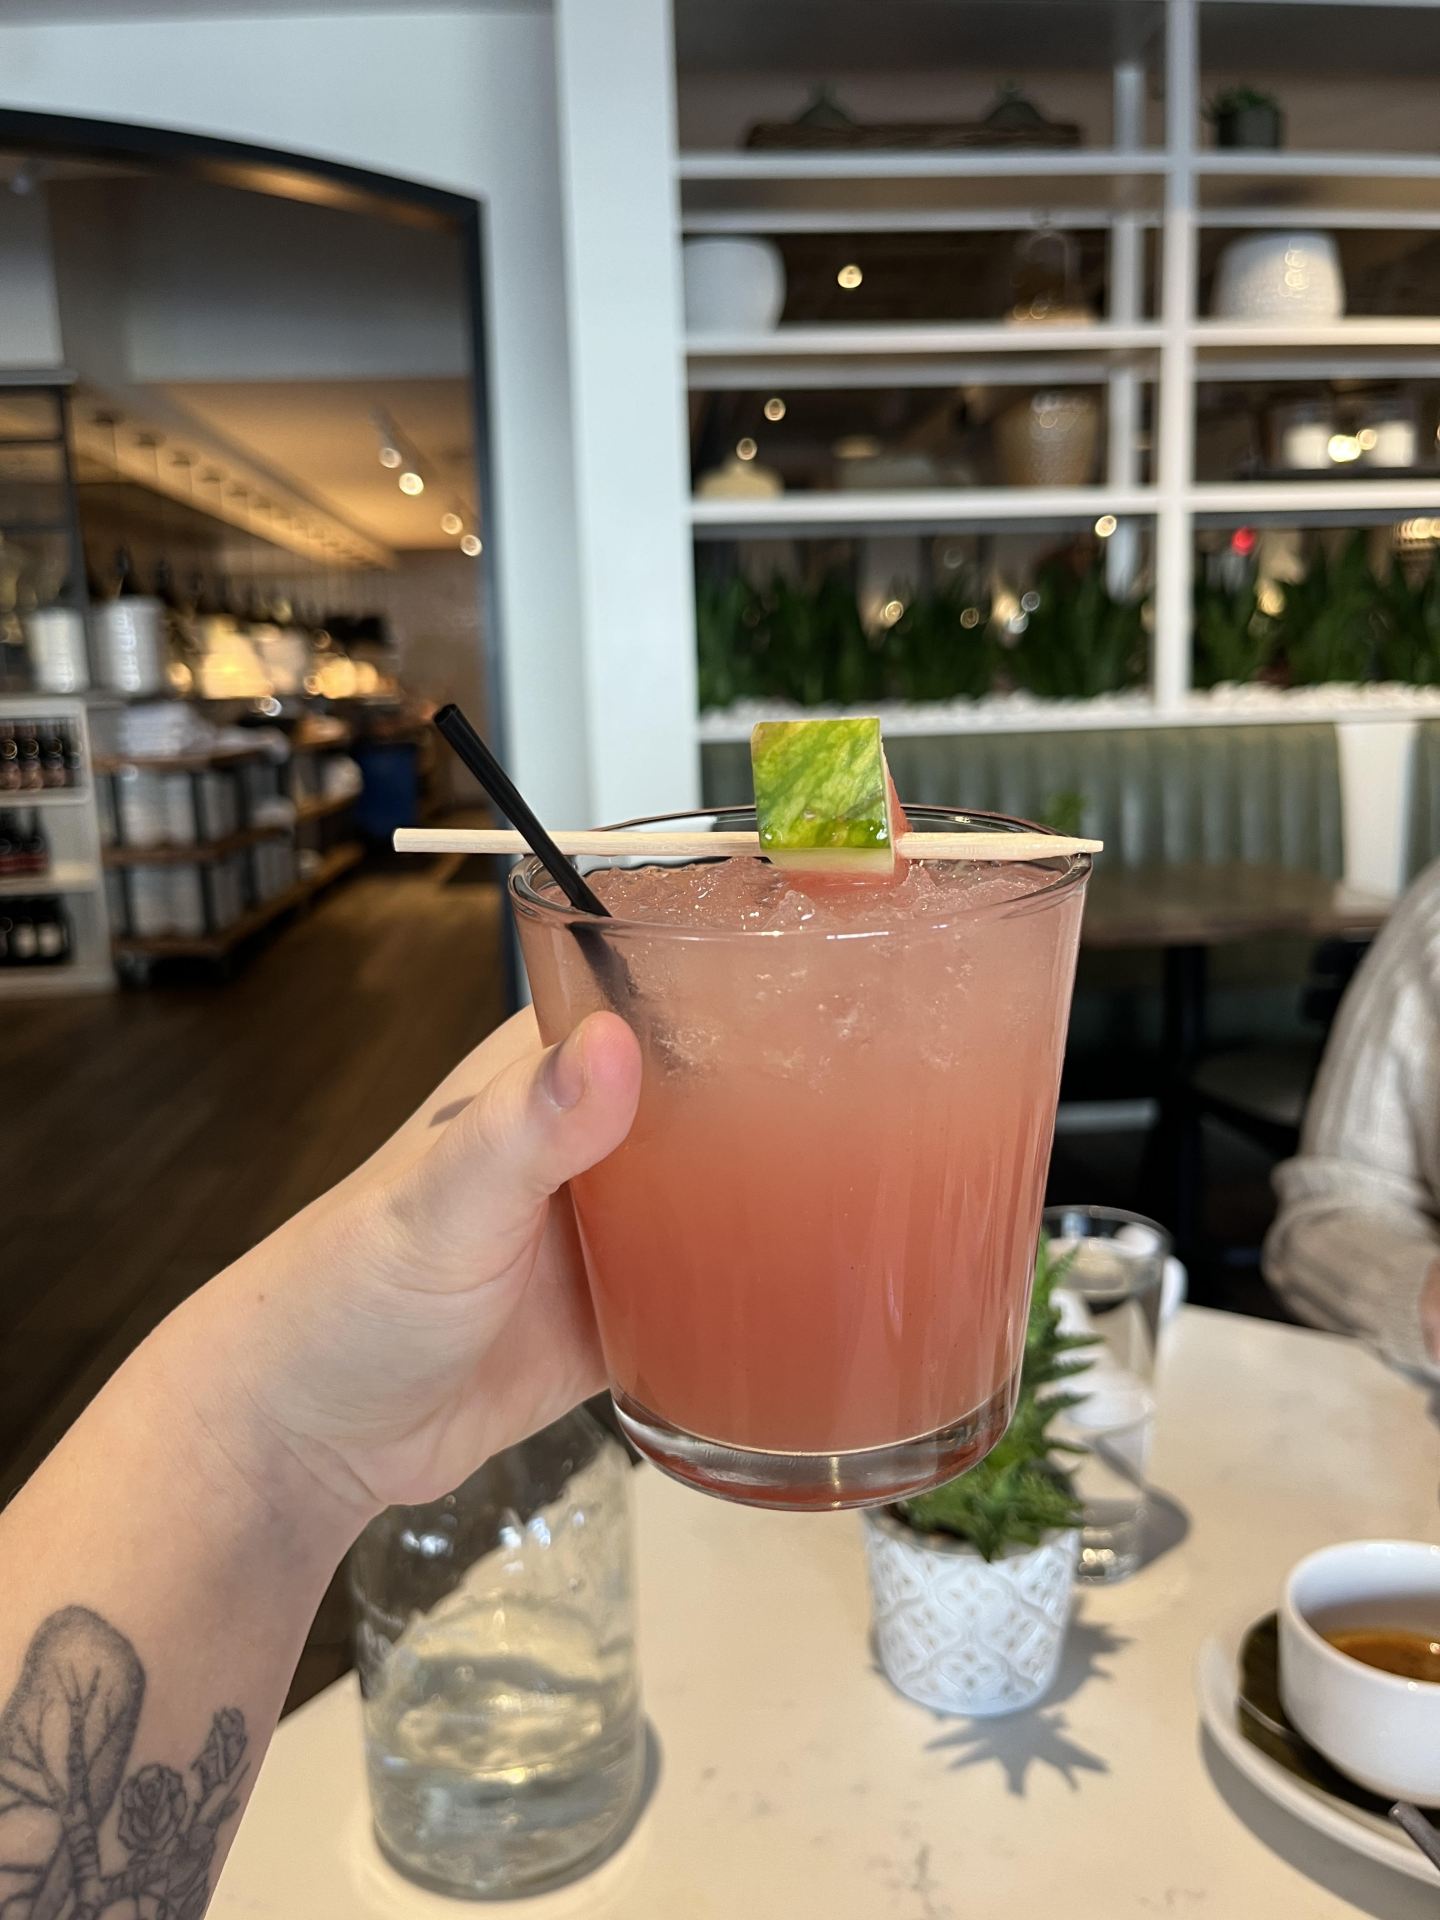 The "Watermelon" cocktail is made with cold-pressed watermelon juice and Western Reserve organic vodka. Credit: Kate Shields | Campus Editor